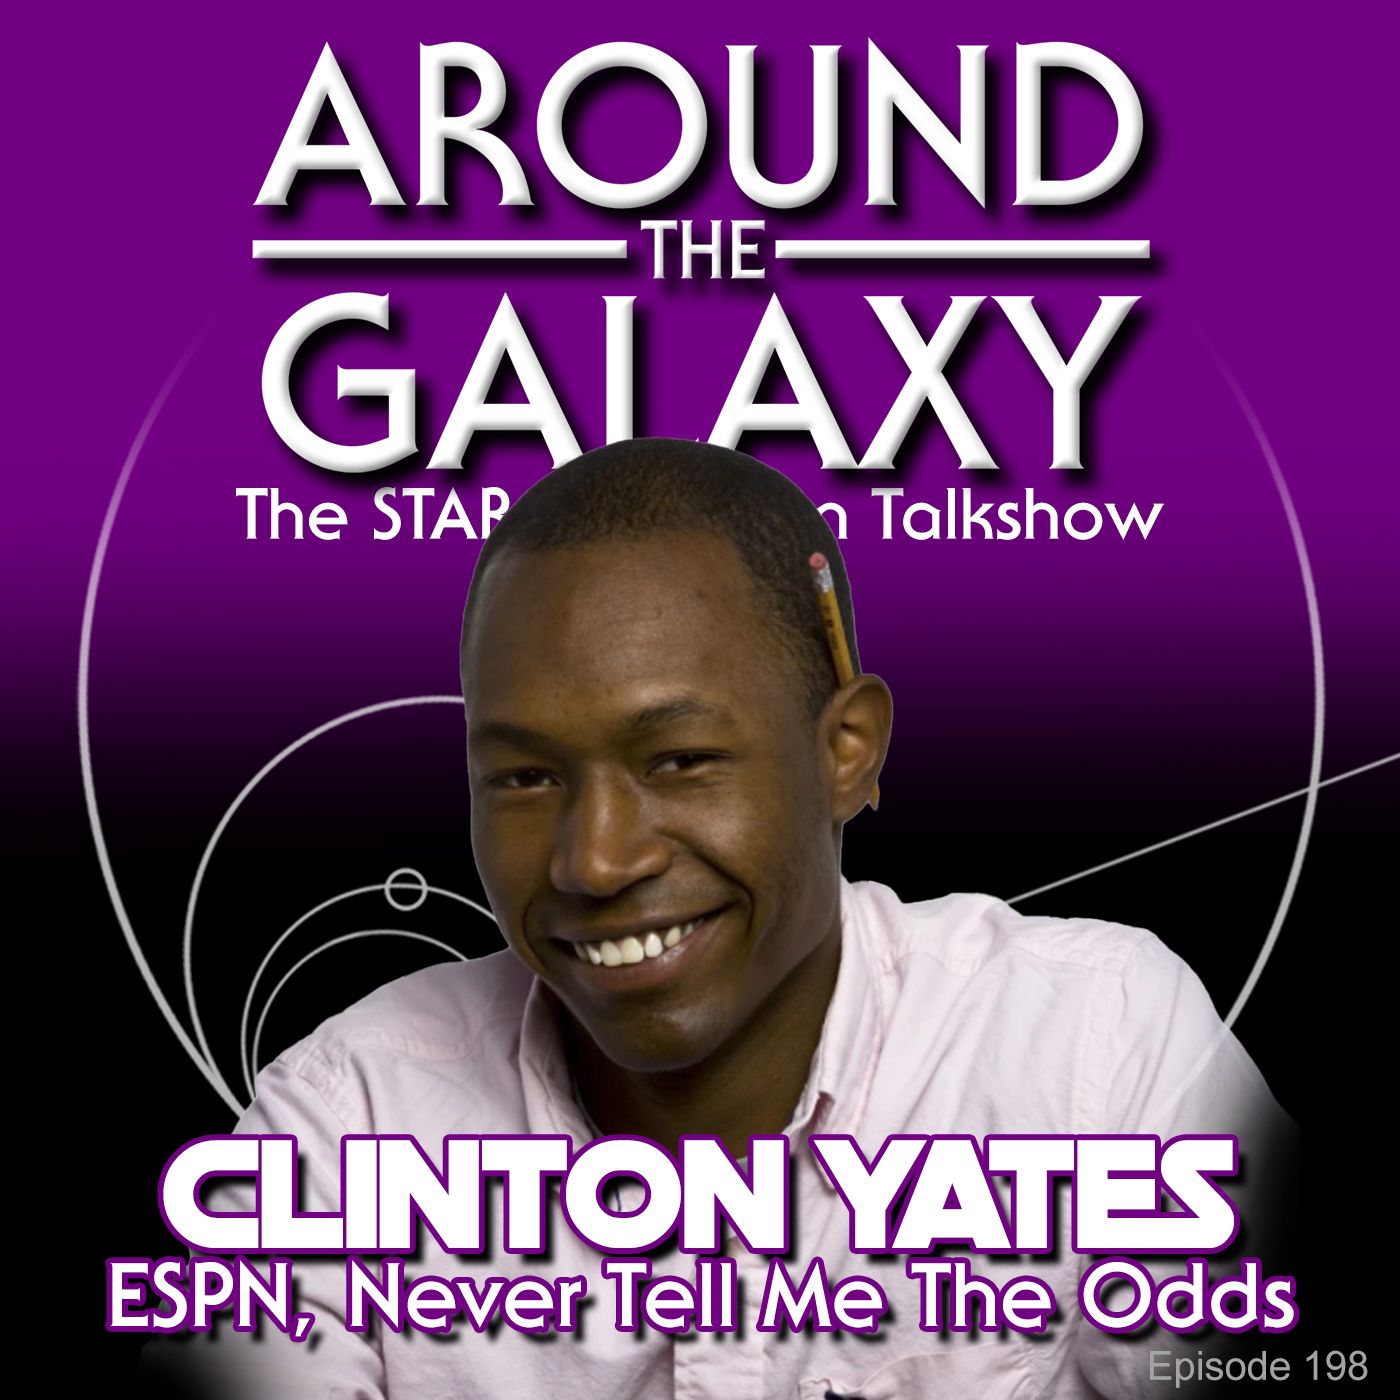 Clinton Yates, Part One - ESPN, Star Wars and Sports